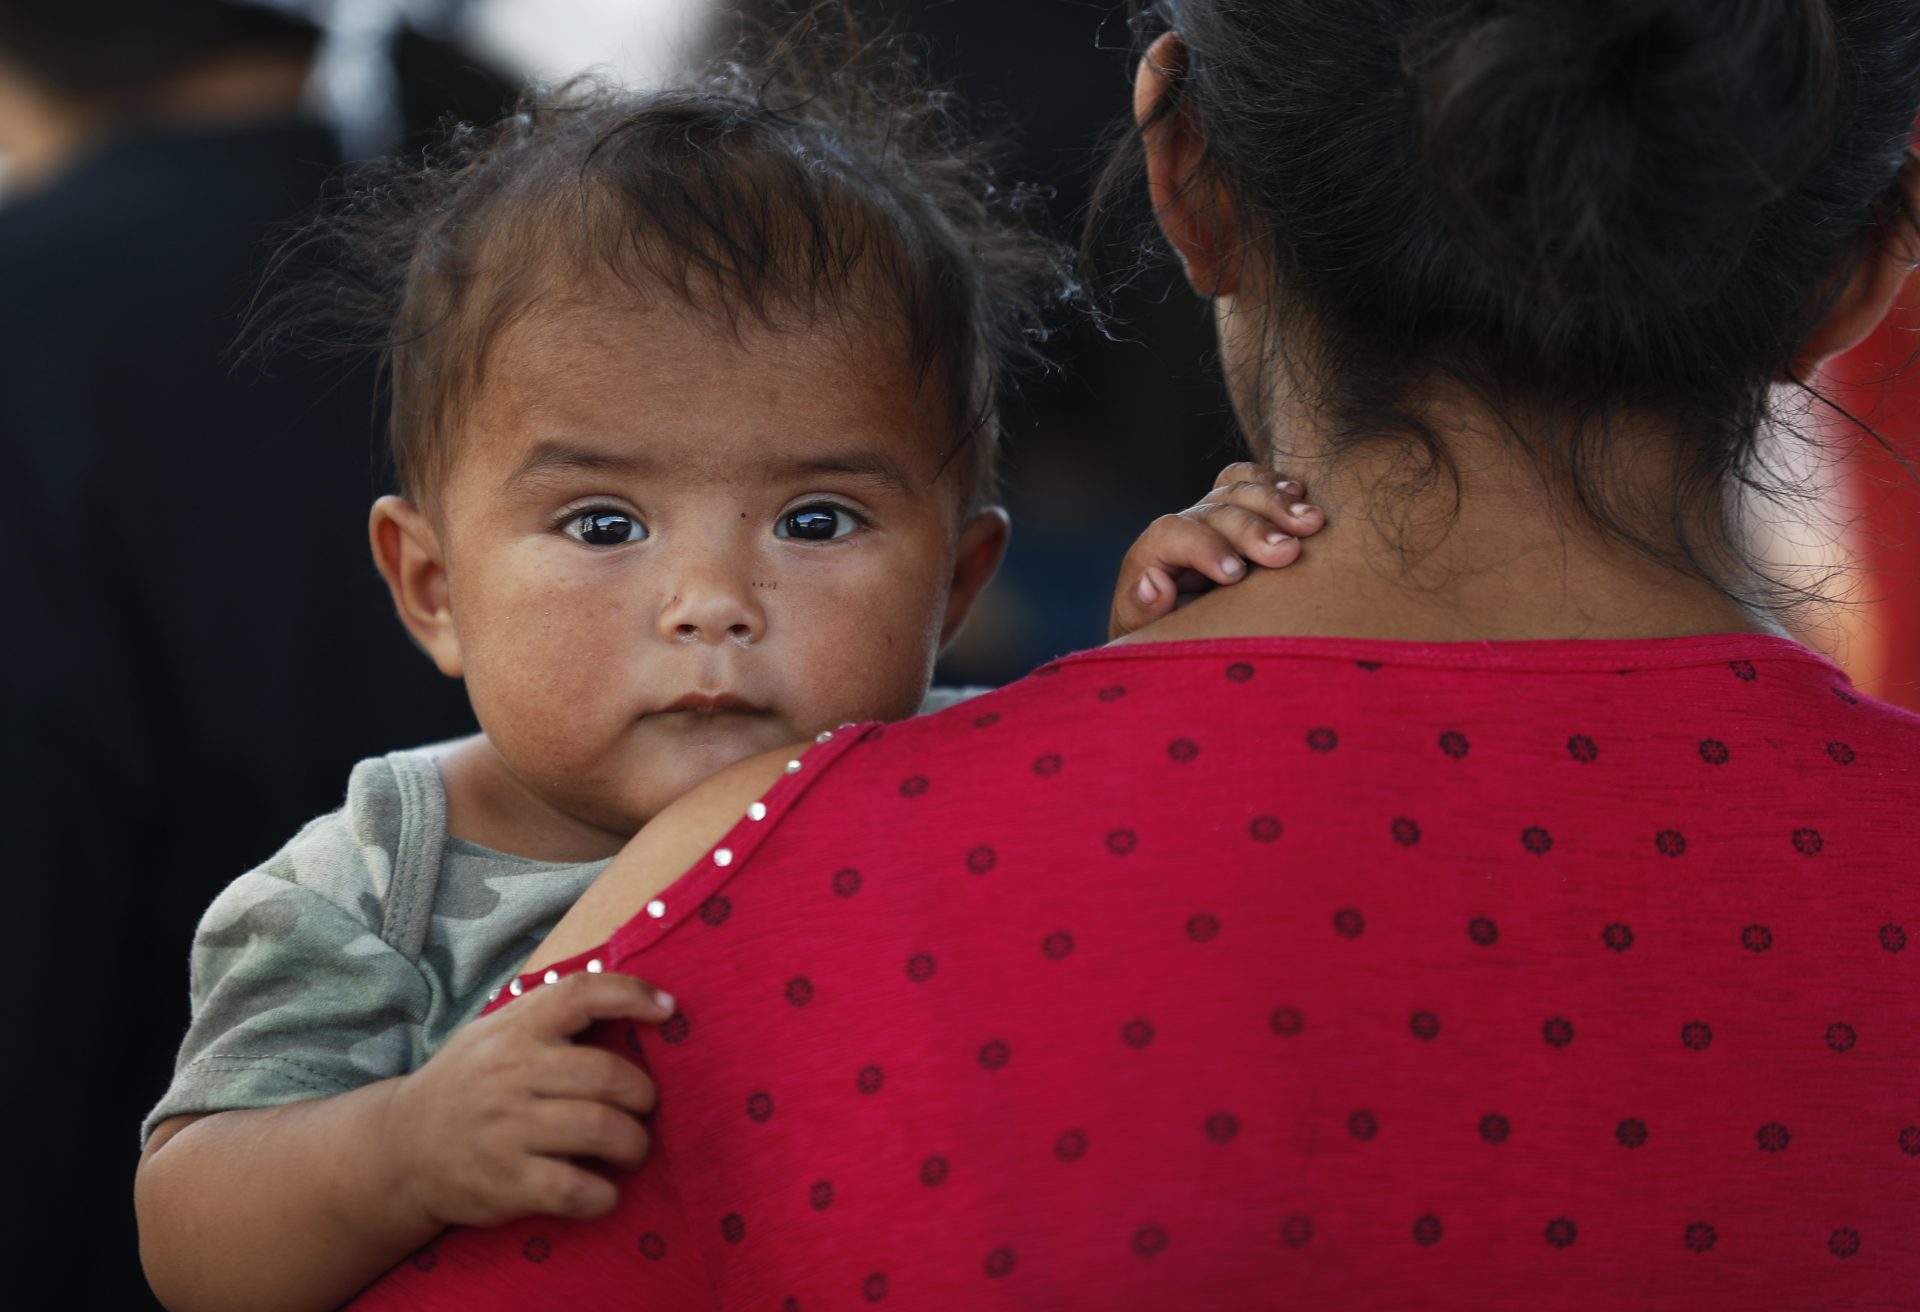 A Honduran migrant mother and her 7-month-old child stand in line to board a bus that will take them and other migrants to Monterrey, from an immigration center in Nuevo Laredo, Mexico, Thursday, July 18, 2019. 